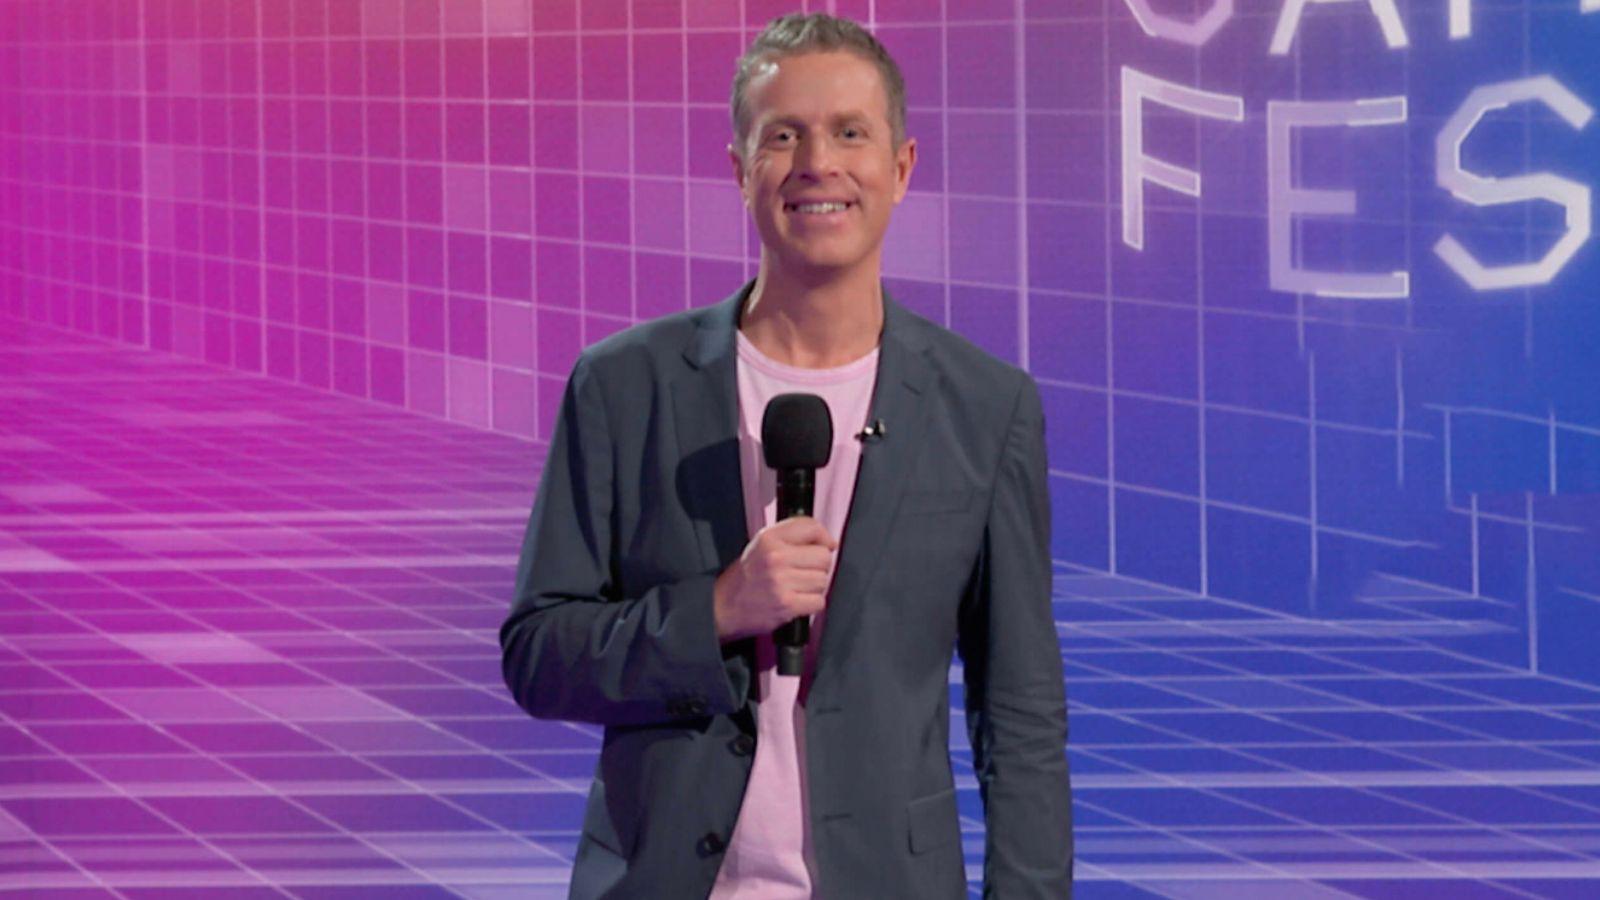 Geoff Keighley at Summer Game Fest